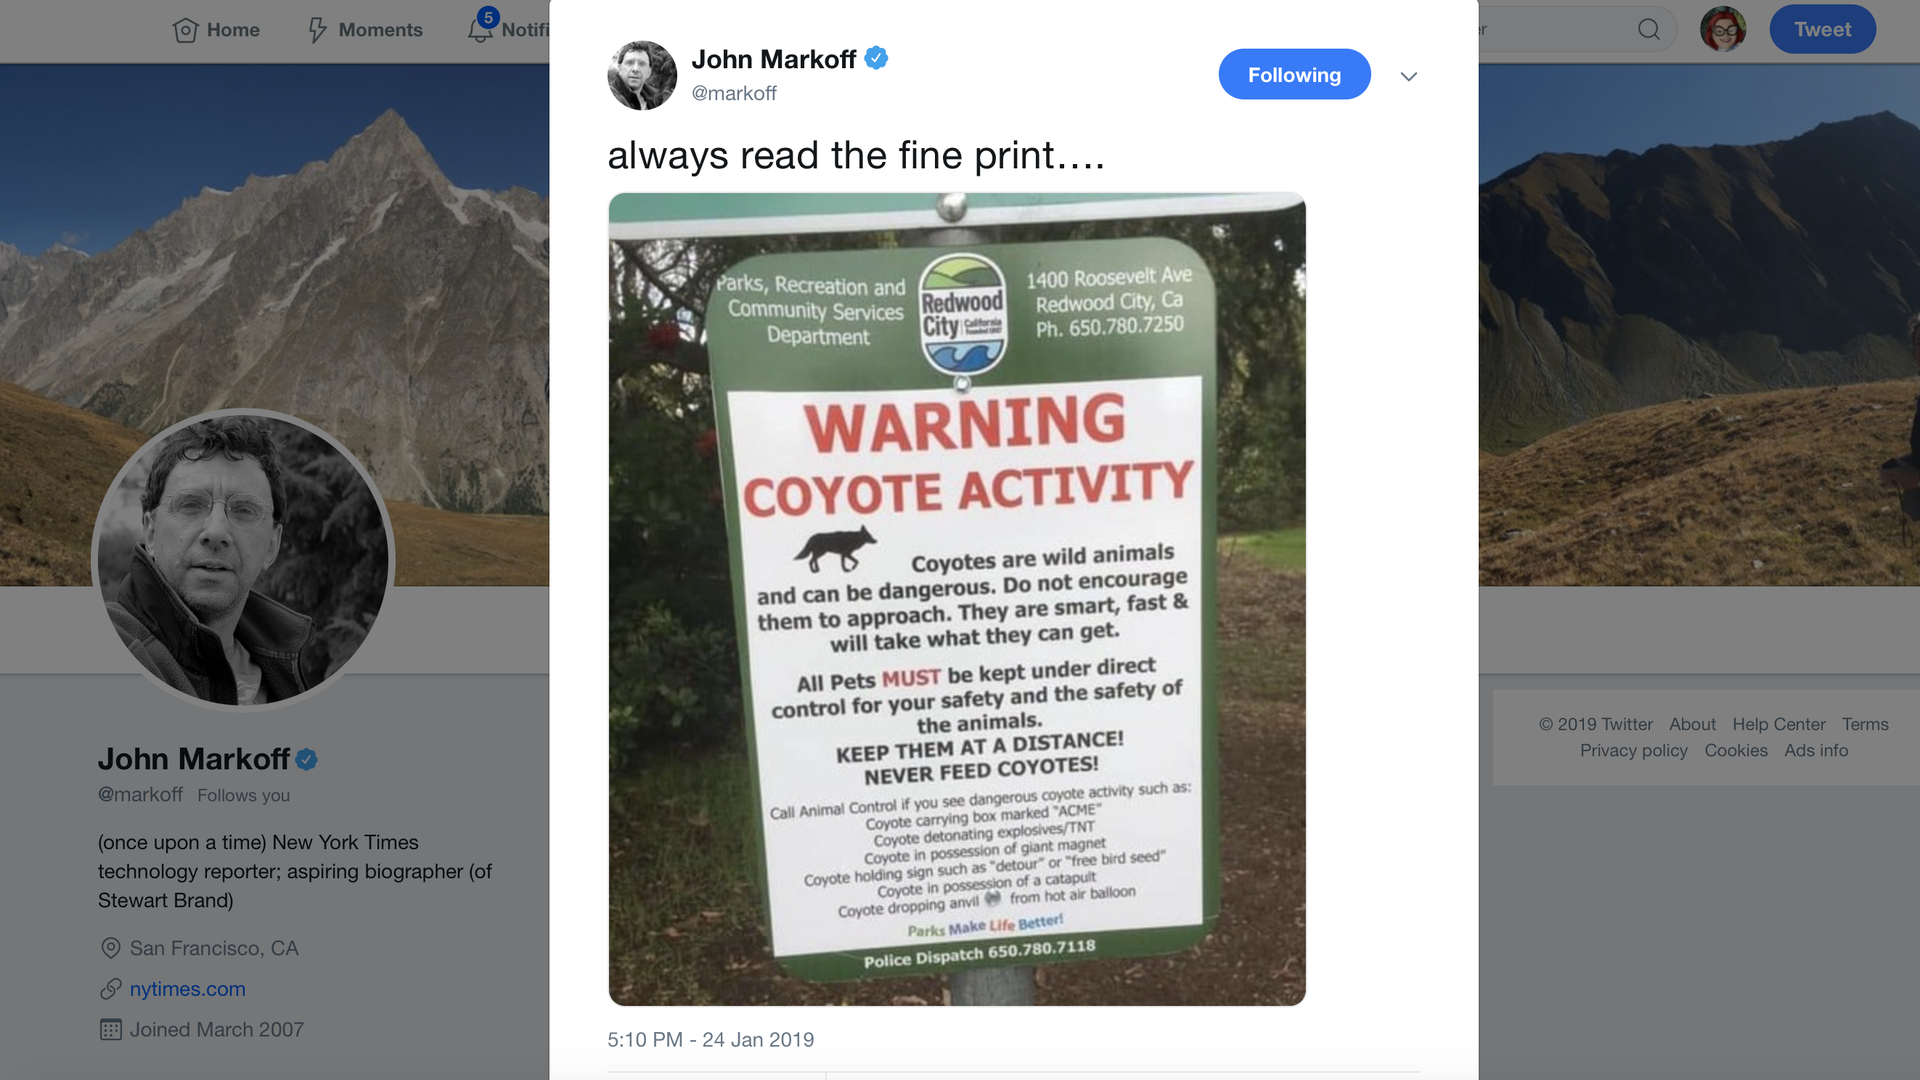 A Coyote warning sign worth reading